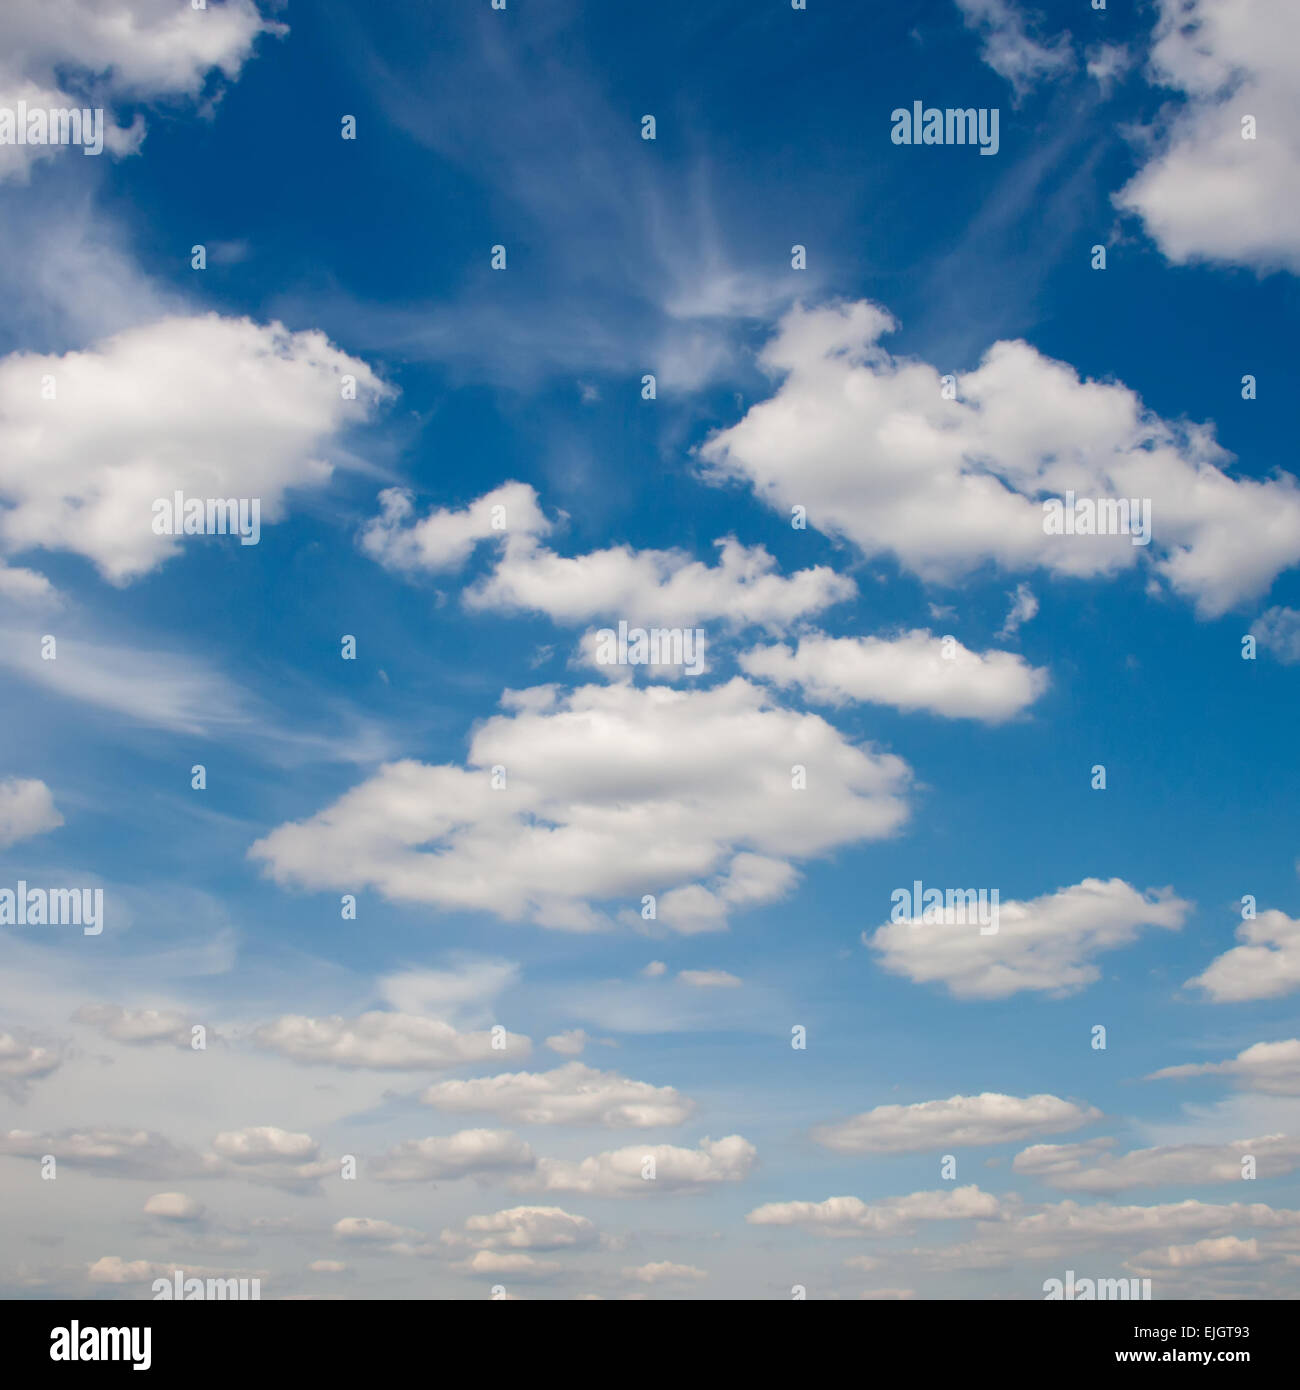 Blue sky with white clouds. Natural background image Stock Photo